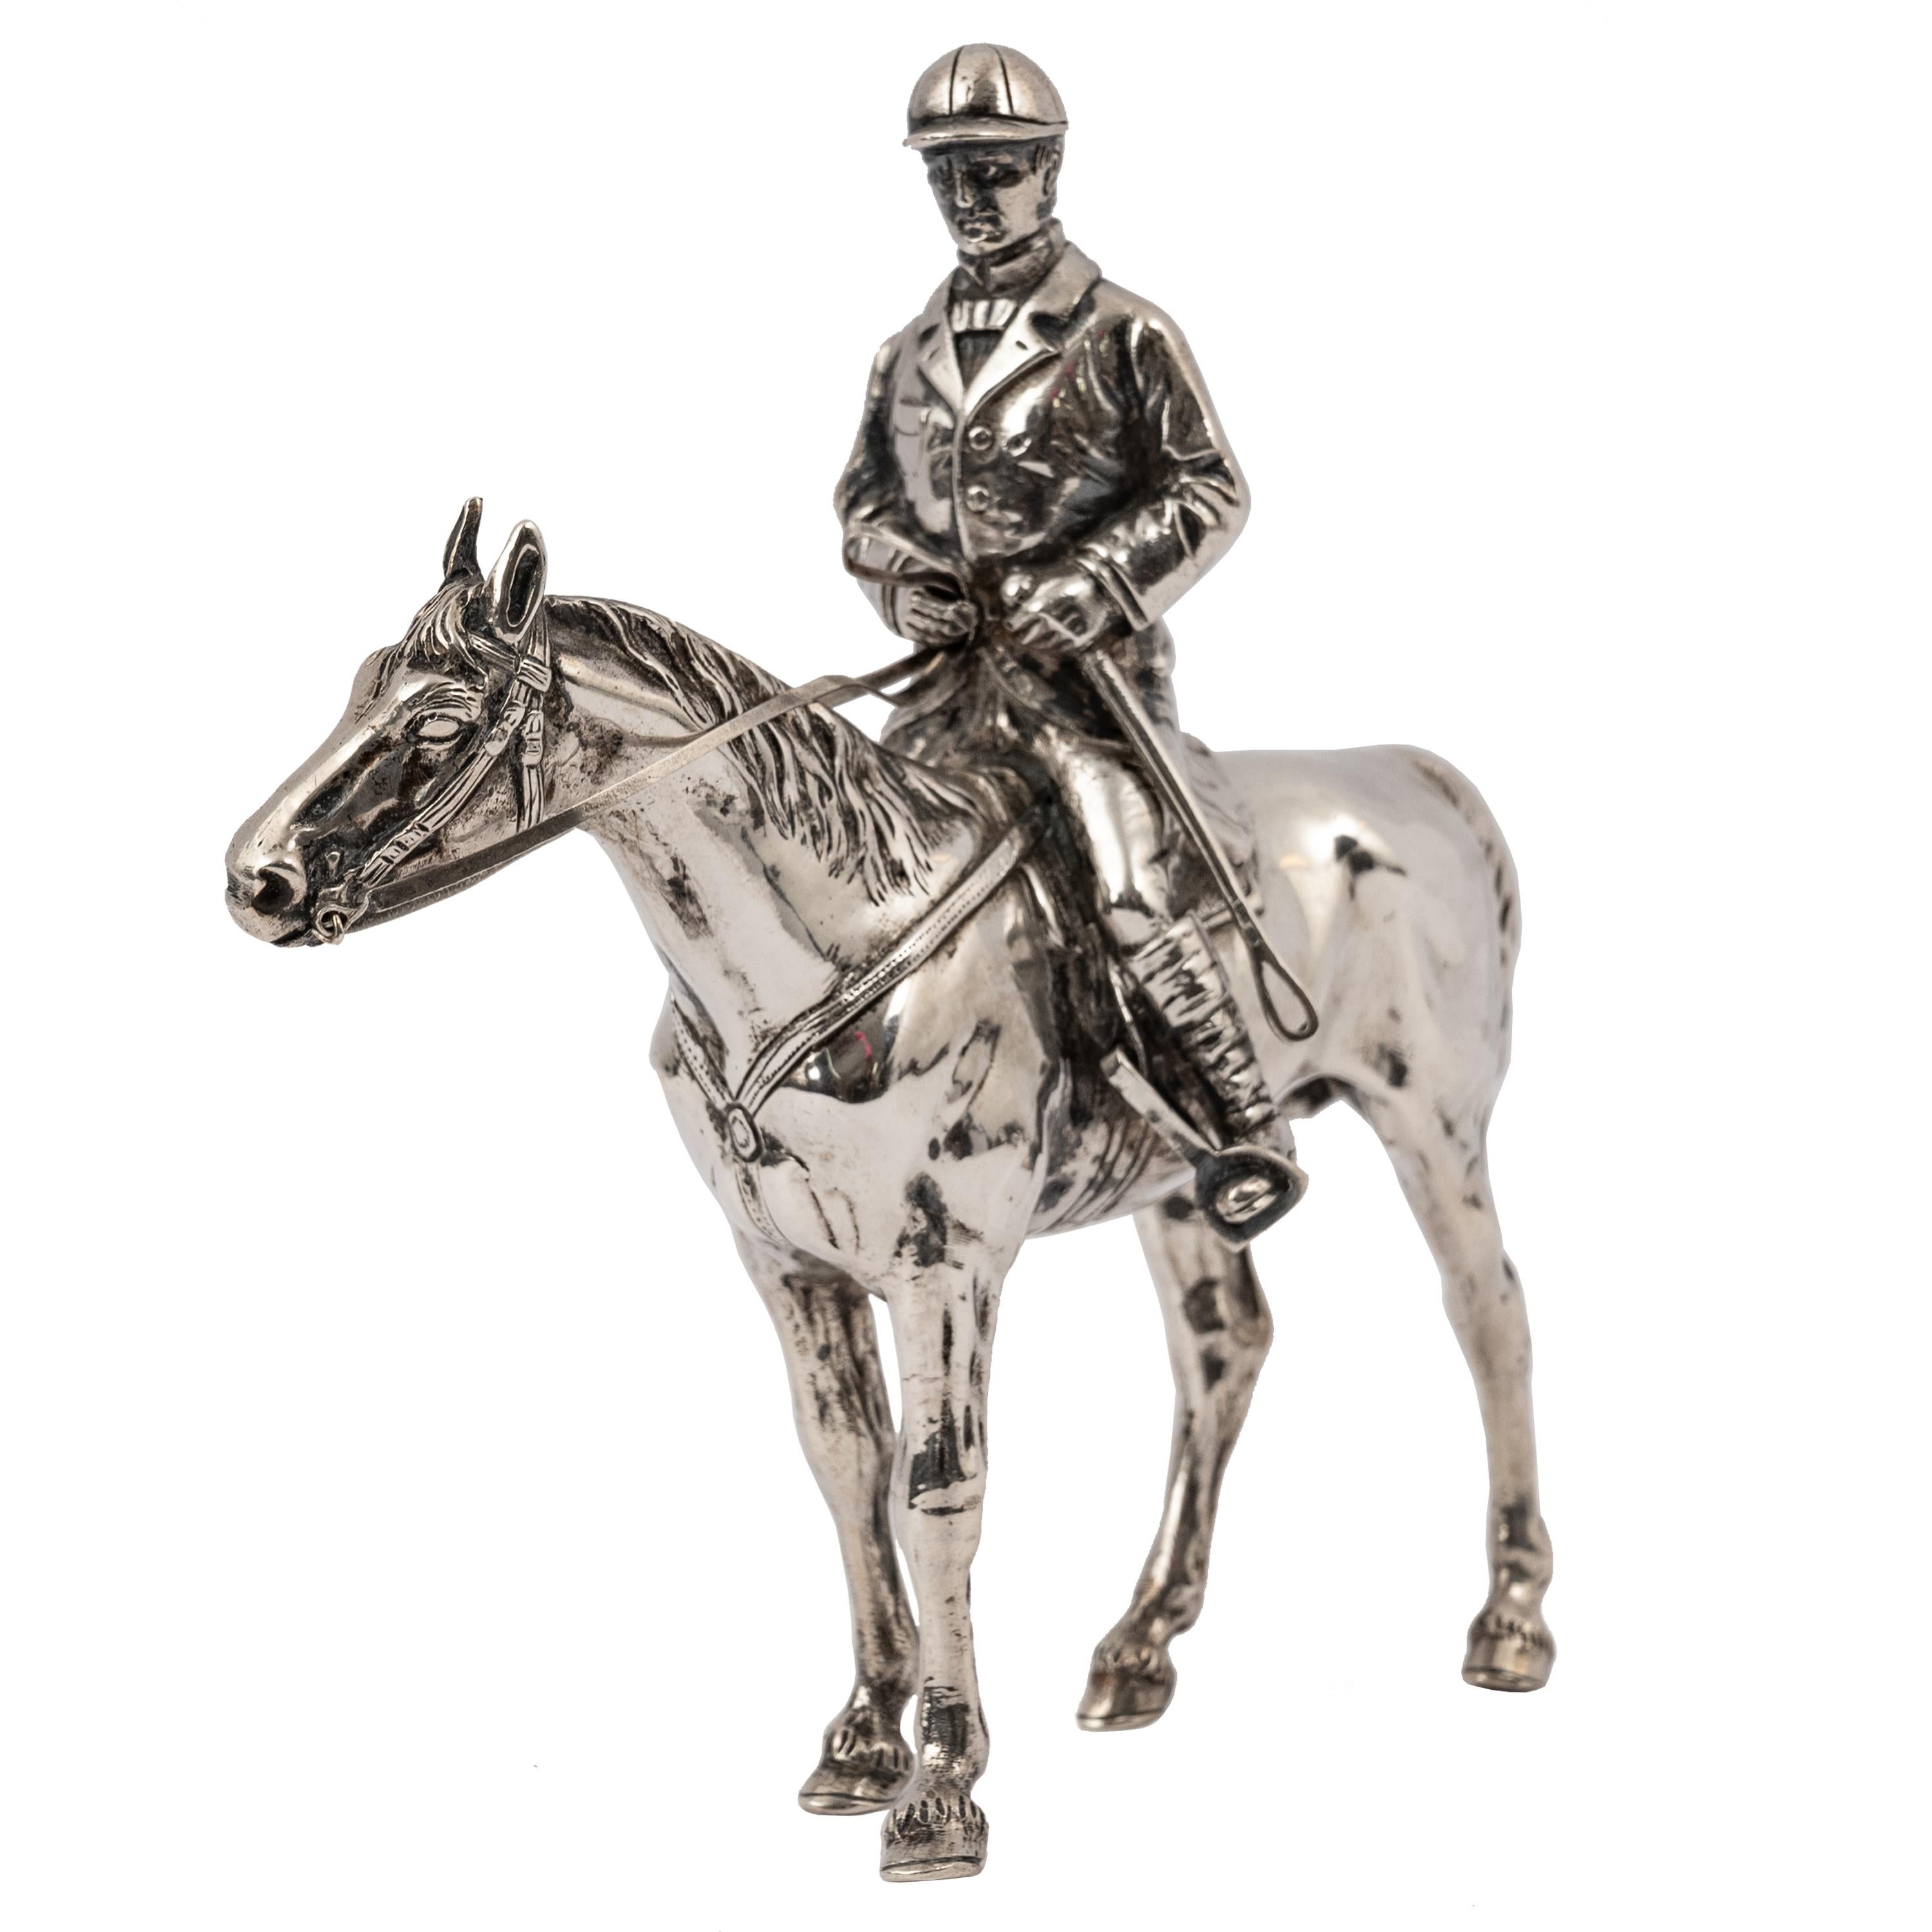 Early 20th Century Antique Sterling Silver Equestrian Horse & Rider Dressage Statue Sculpture 1920 For Sale